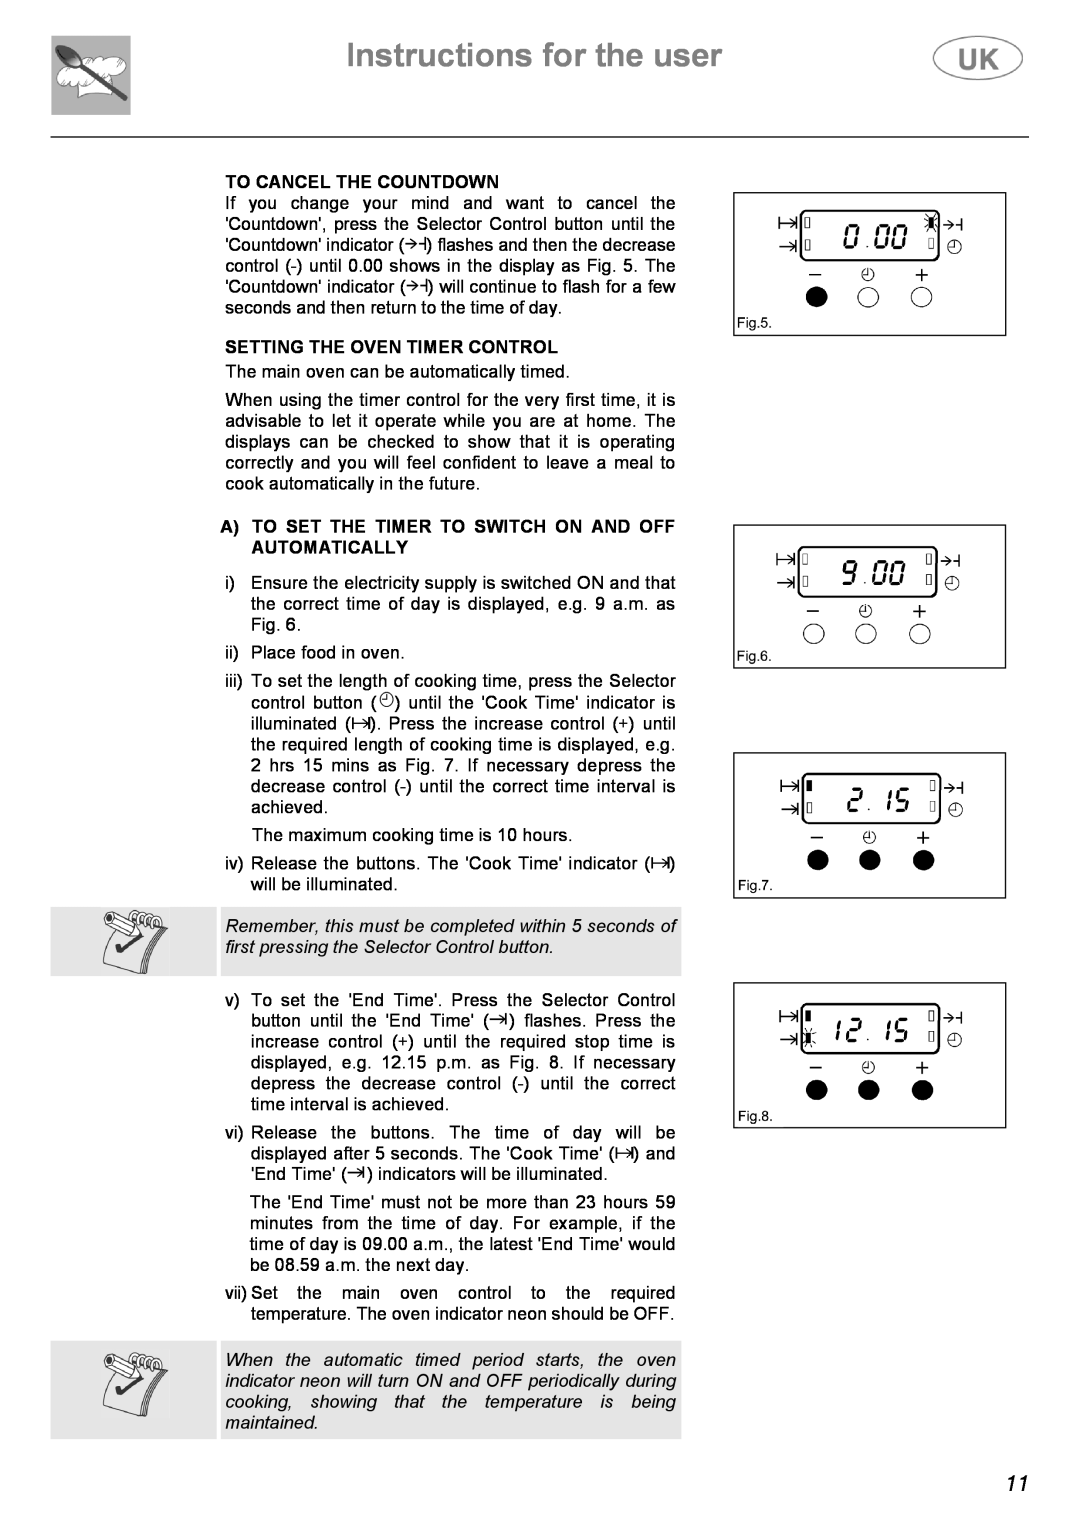 Electrolux C41022G manual To Cancel The Countdown, Setting The Oven Timer Control, Instructions for the user 